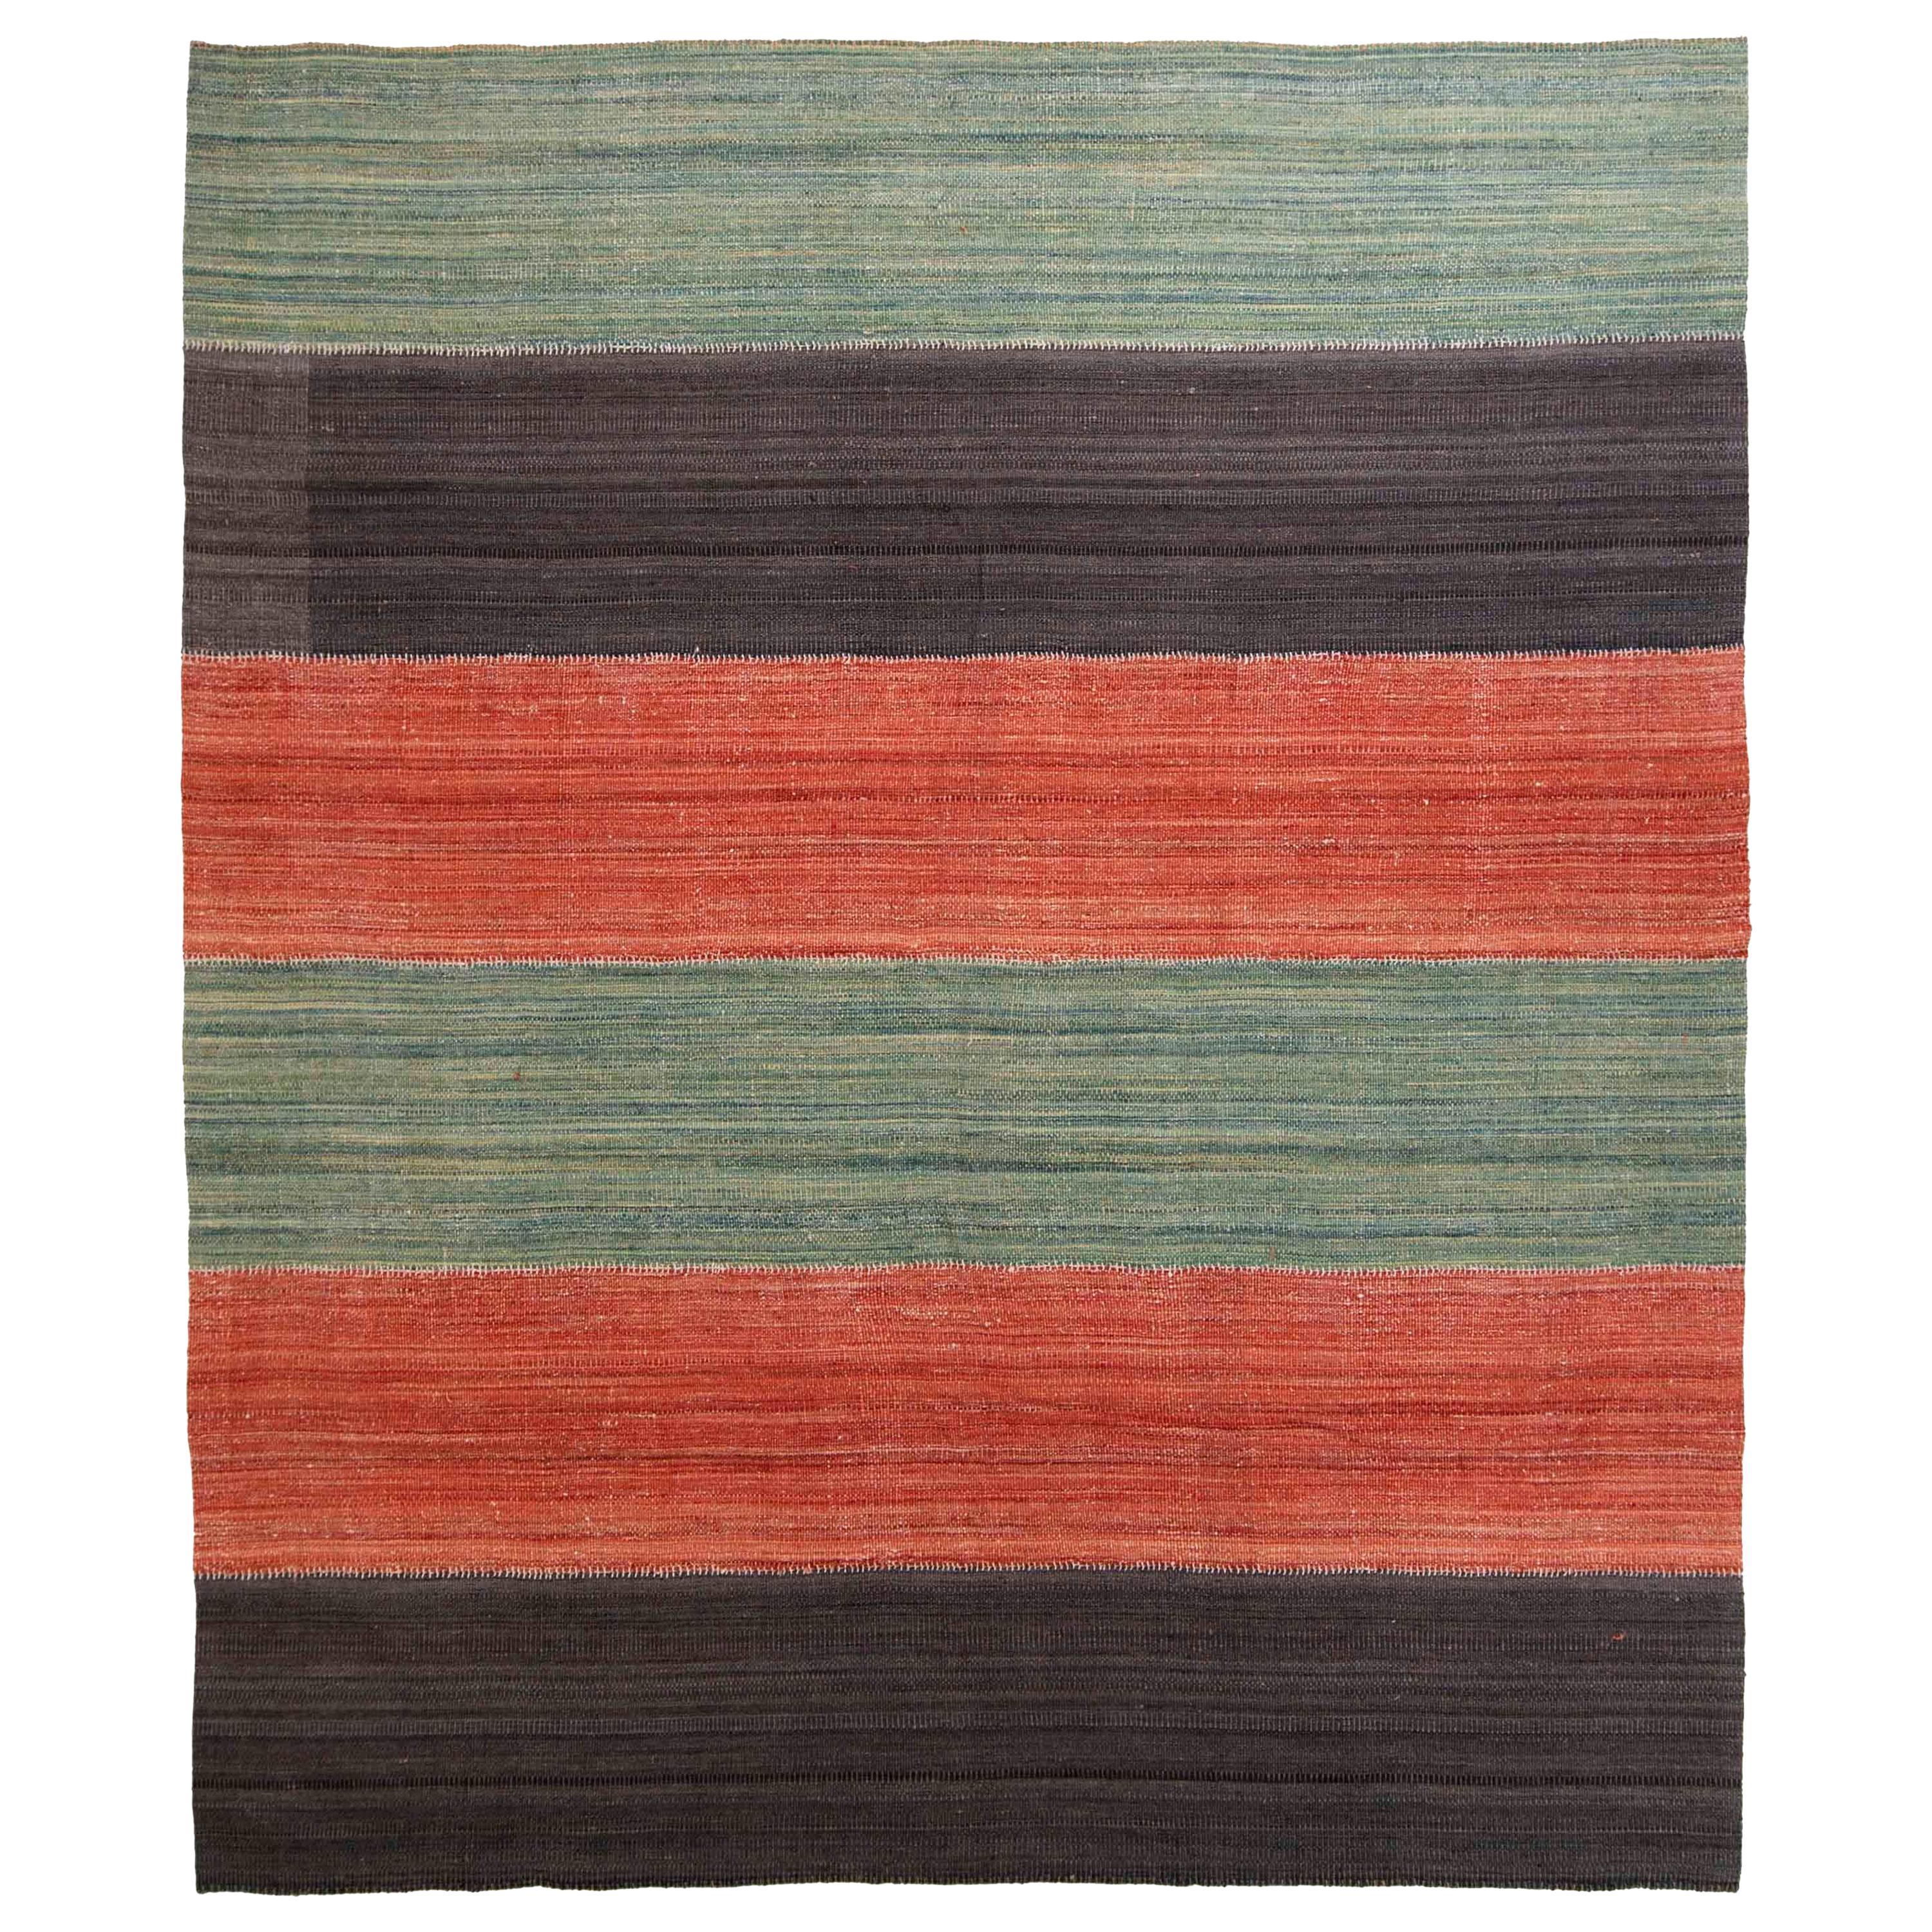 Modern Turkish Kilim Rug in Black, Red and Green Flat-Weave Stripes Pattern For Sale